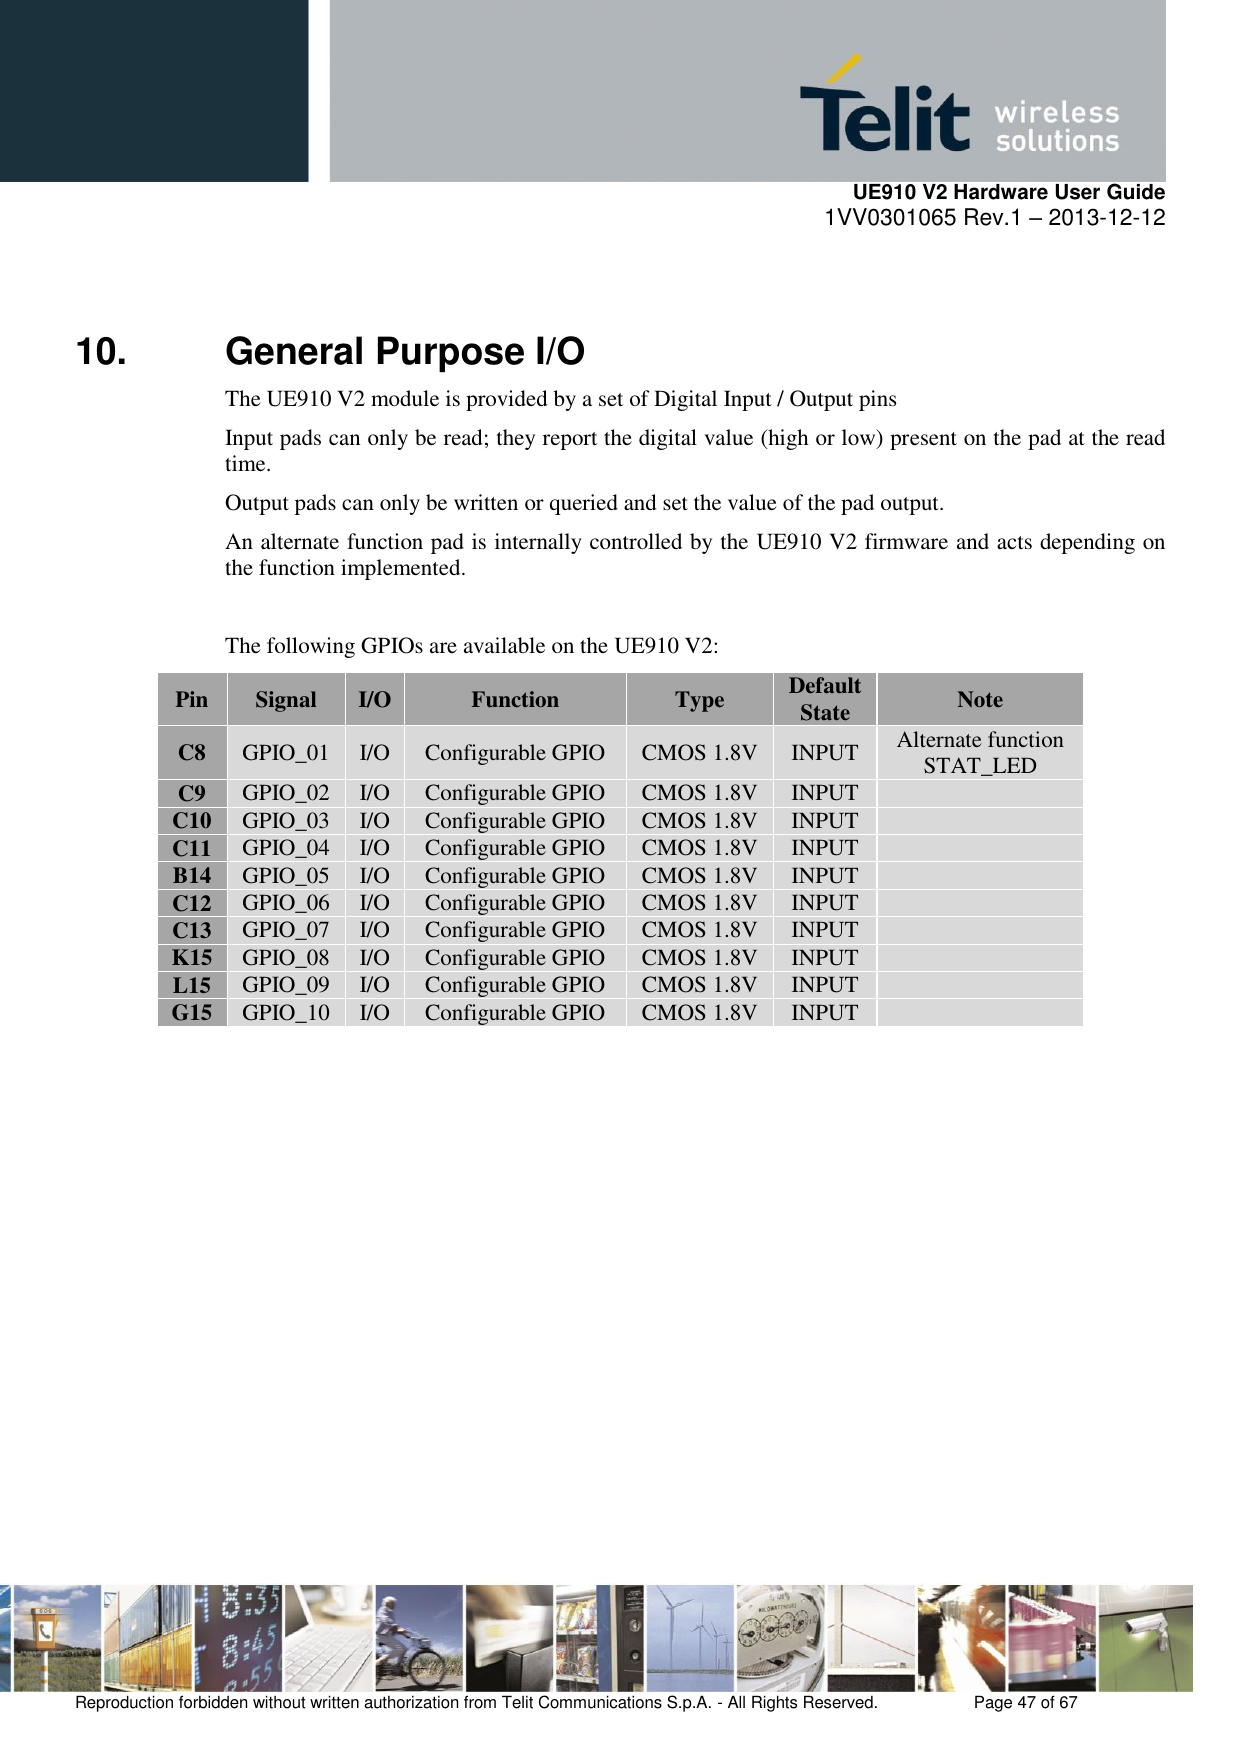     UE910 V2 Hardware User Guide 1VV0301065 Rev.1 – 2013-12-12  Reproduction forbidden without written authorization from Telit Communications S.p.A. - All Rights Reserved.    Page 47 of 67                                                     10.  General Purpose I/O The UE910 V2 module is provided by a set of Digital Input / Output pins Input pads can only be read; they report the digital value (high or low) present on the pad at the read time. Output pads can only be written or queried and set the value of the pad output. An alternate function pad is internally controlled by the UE910 V2 firmware and acts depending on the function implemented.  The following GPIOs are available on the UE910 V2: Pin Signal I/O Function Type Default State Note C8 GPIO_01 I/O Configurable GPIO CMOS 1.8V INPUT Alternate function STAT_LED C9 GPIO_02 I/O Configurable GPIO CMOS 1.8V INPUT  C10 GPIO_03 I/O Configurable GPIO CMOS 1.8V INPUT  C11 GPIO_04 I/O Configurable GPIO CMOS 1.8V INPUT  B14 GPIO_05 I/O Configurable GPIO CMOS 1.8V INPUT  C12 GPIO_06 I/O Configurable GPIO CMOS 1.8V INPUT  C13 GPIO_07 I/O Configurable GPIO CMOS 1.8V INPUT  K15 GPIO_08 I/O Configurable GPIO CMOS 1.8V INPUT  L15 GPIO_09 I/O Configurable GPIO CMOS 1.8V INPUT  G15 GPIO_10 I/O Configurable GPIO CMOS 1.8V INPUT                 